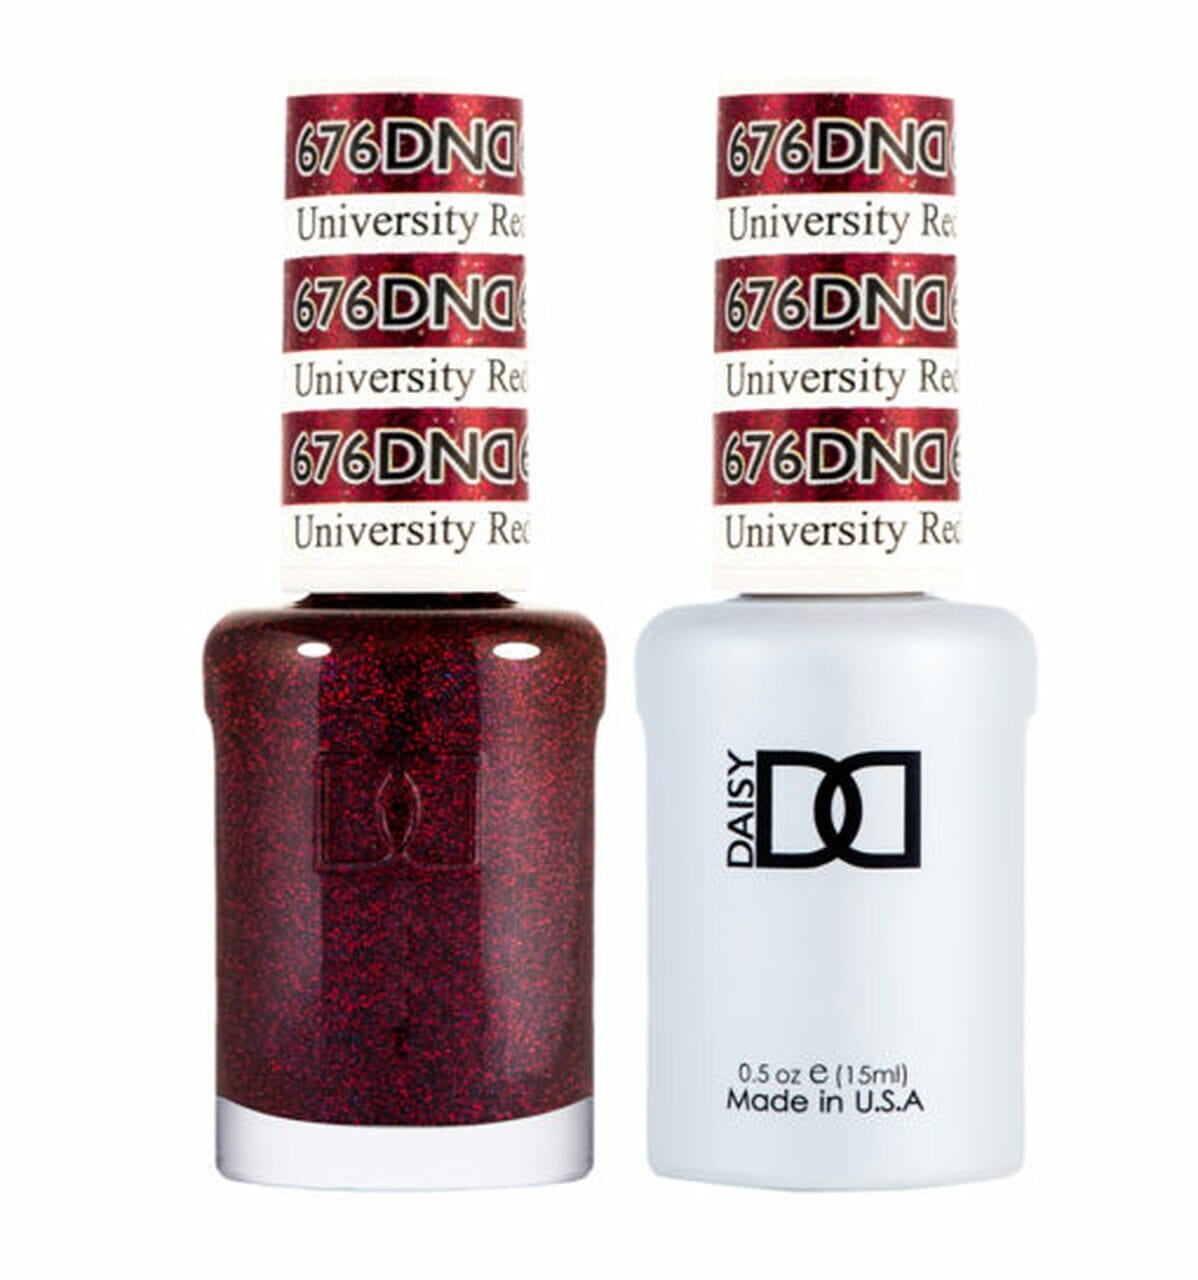 DND Duo Gel Matching Color - 676 Universal Red - Jessica Nail & Beauty Supply - Canada Nail Beauty Supply - DND DUO